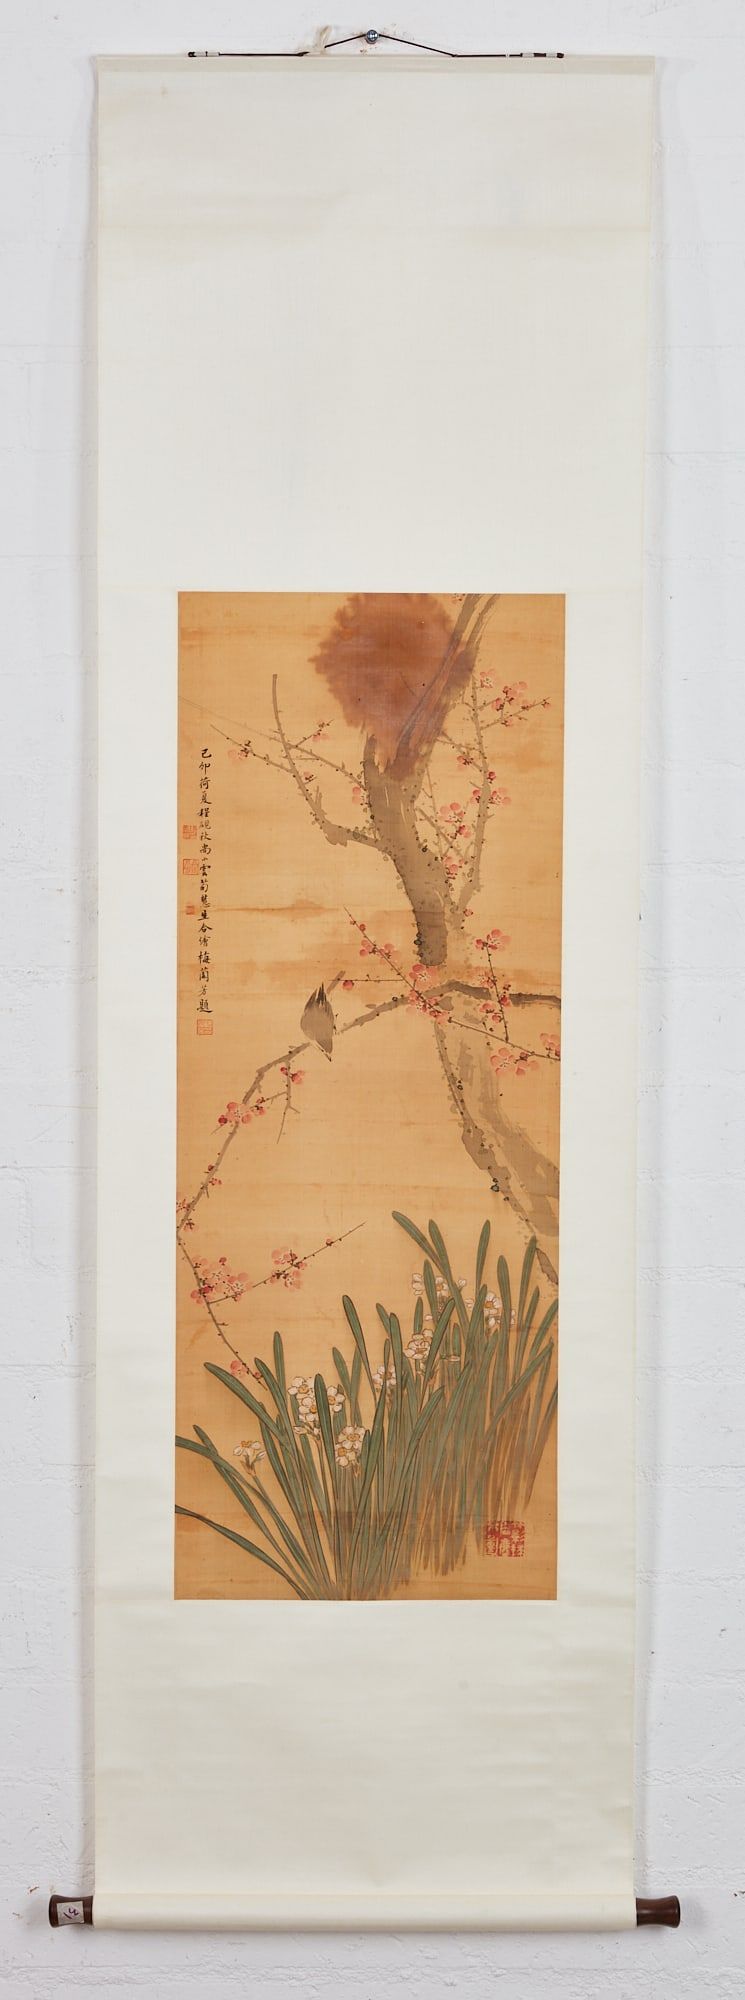 A CHINESE SCROLL DEPICTING BIRDS 2fb3d22